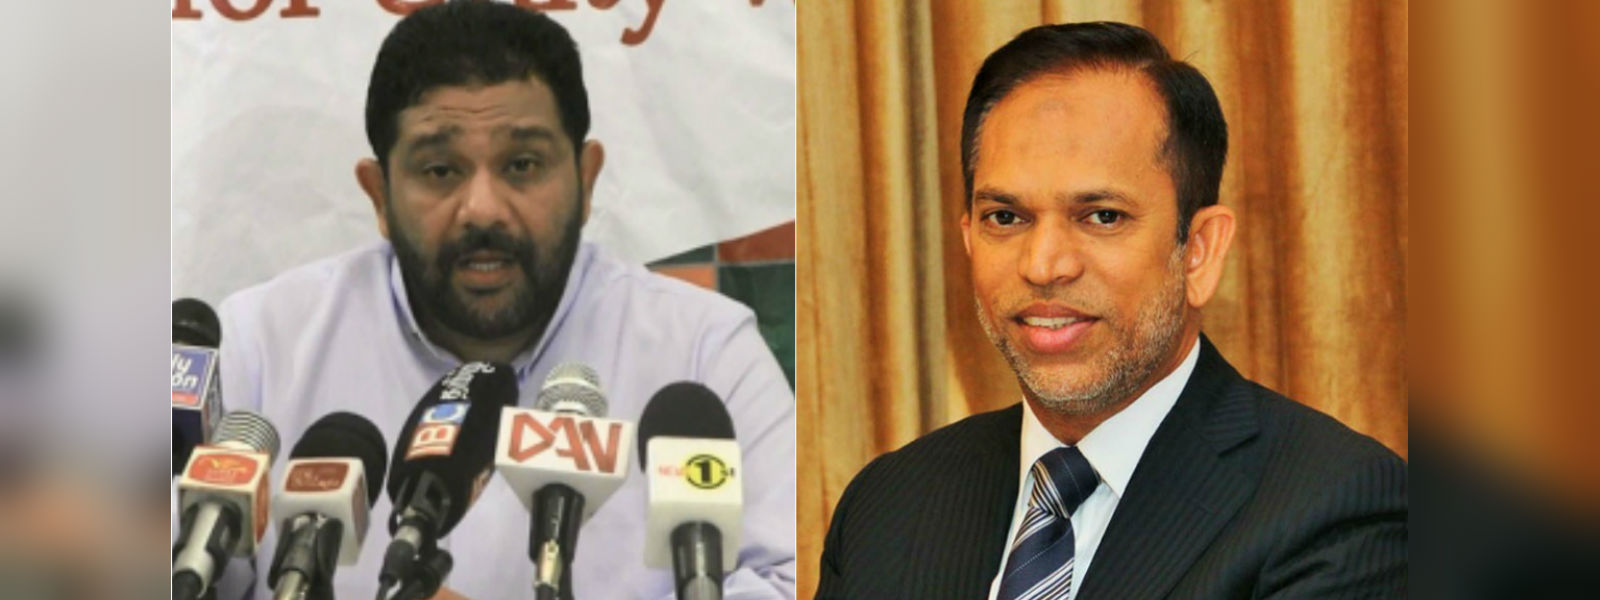 Salley and Hizbullah resign from positions